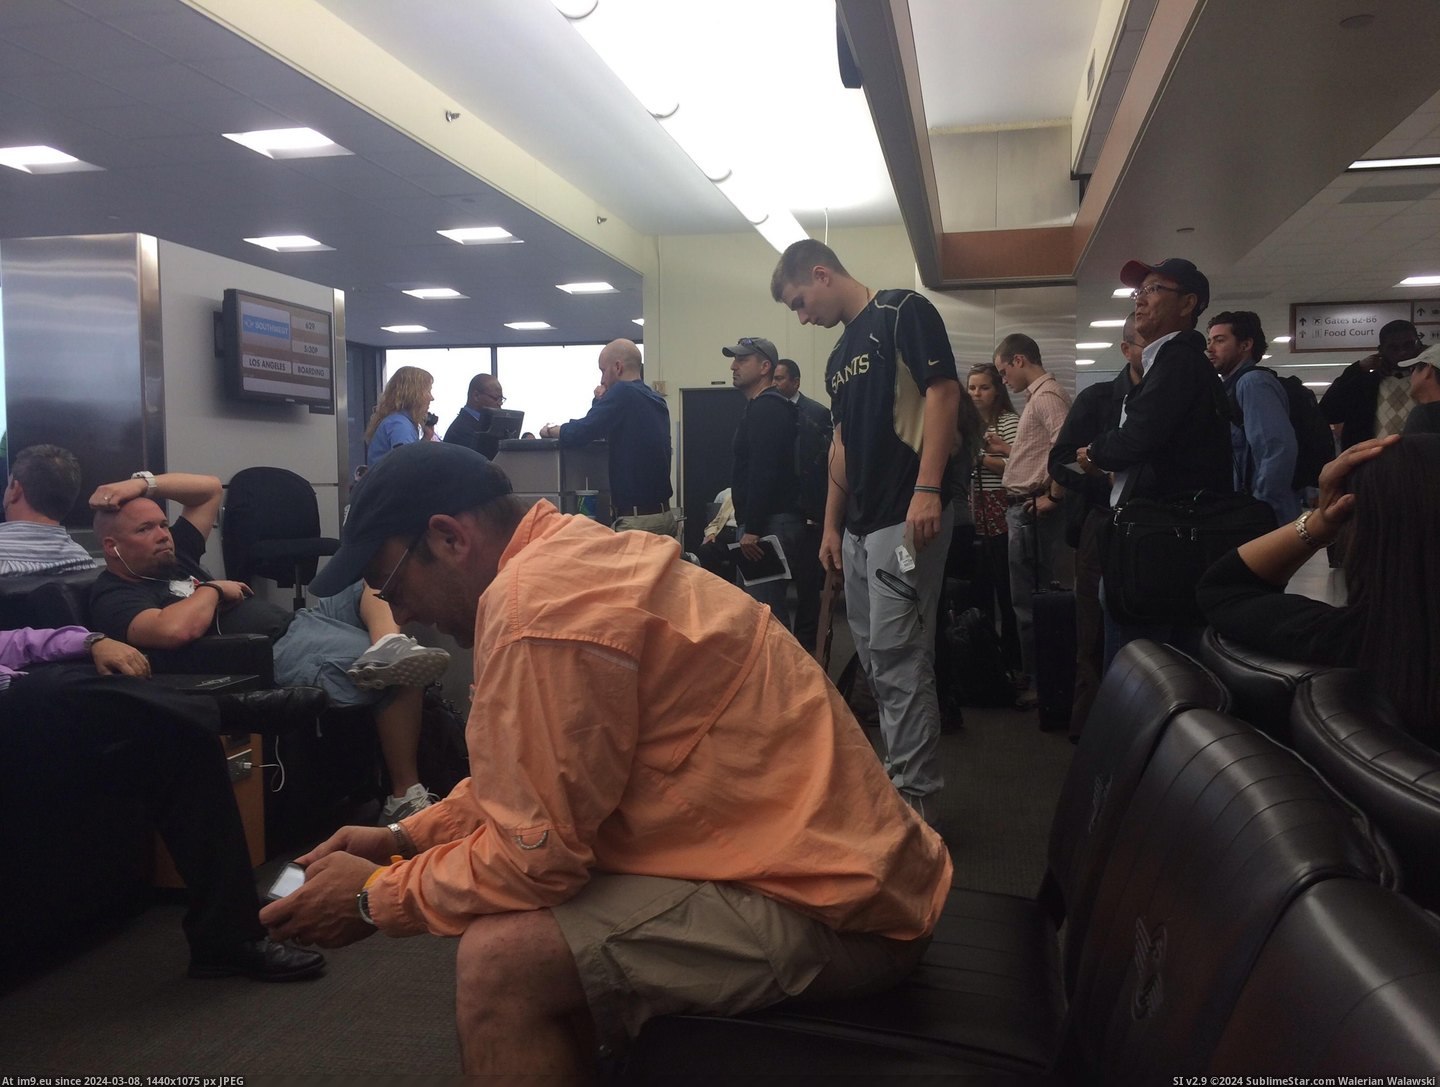 #People #Week #Person #Airport #Southwest #Storms #Misplaced #Changing #Orleans #Ton #Charge [Pics] The storms last week misplaced a ton of people in New Orleans Airport. Southwest only had 1 person in charge of changing  Pic. (Bild von album My r/PICS favs))